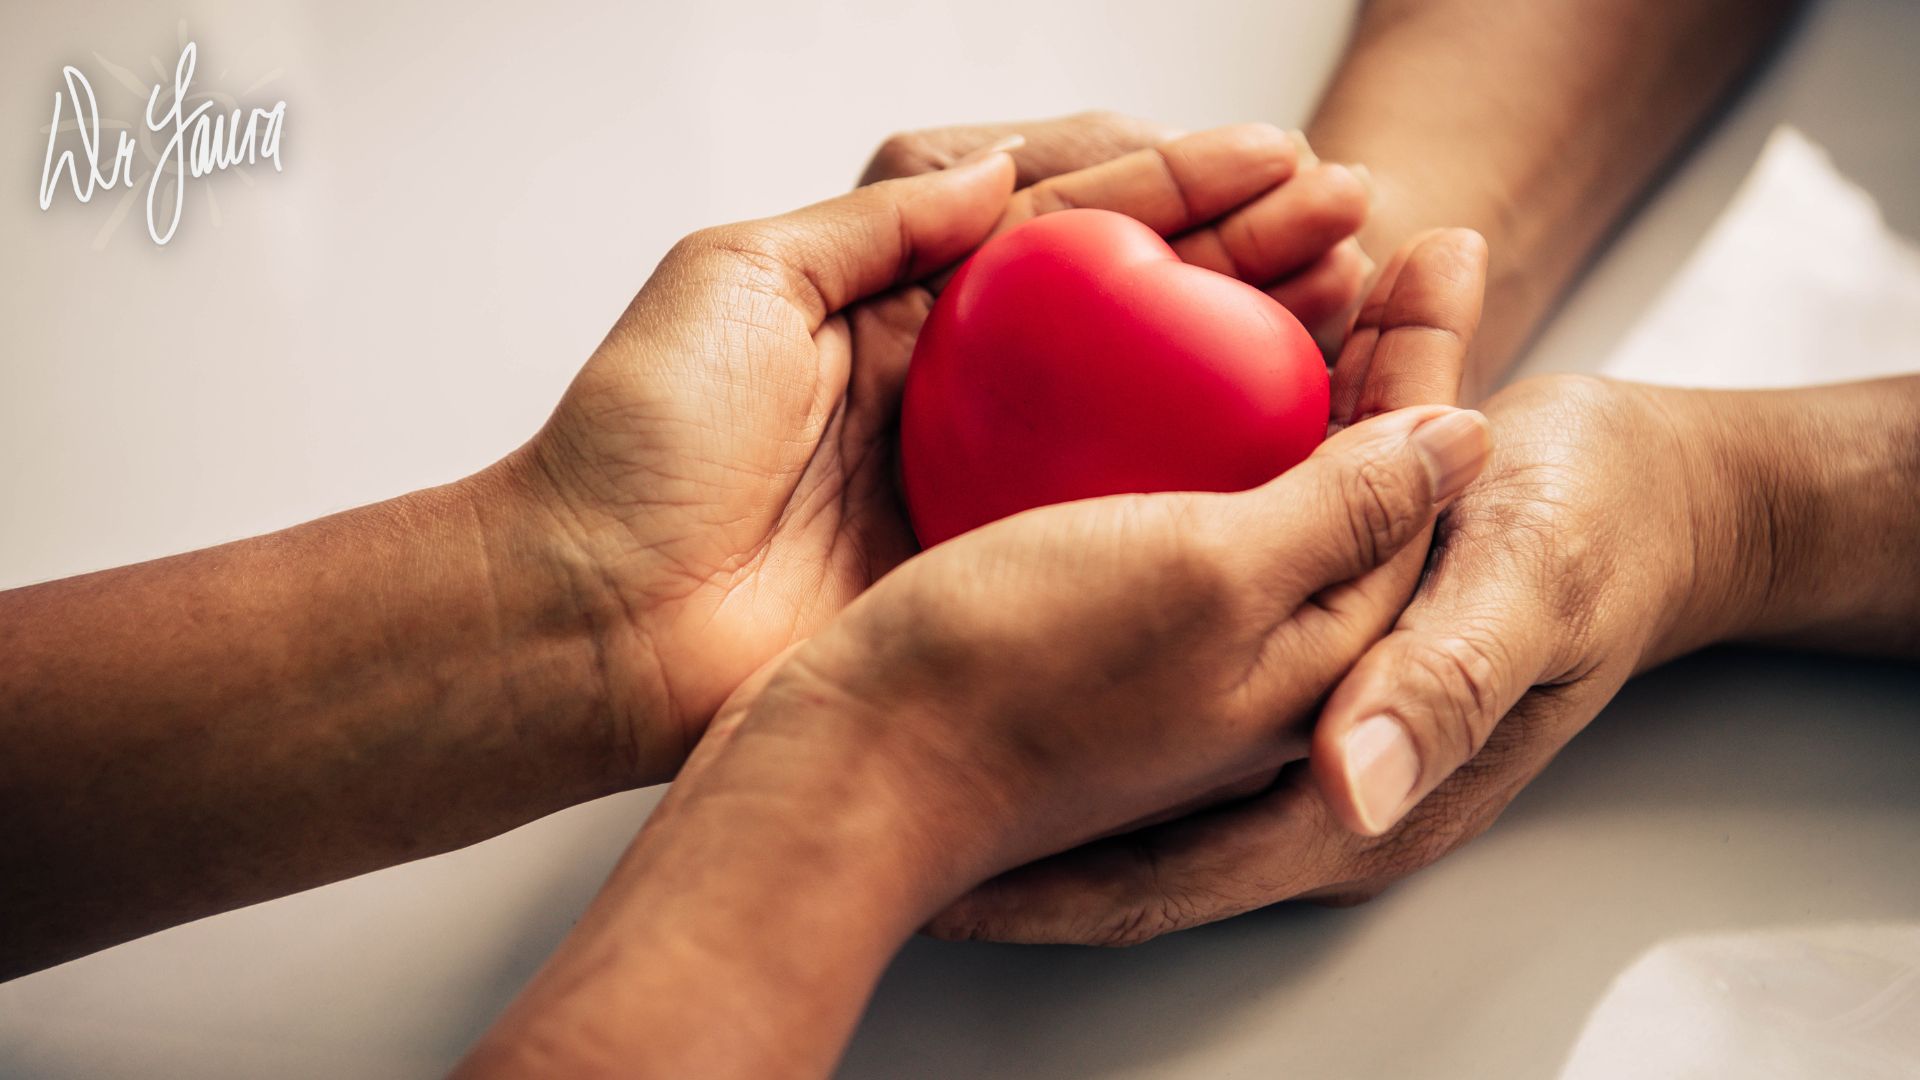 Two hands are placed on top of each other while cradling a heart-shaped object